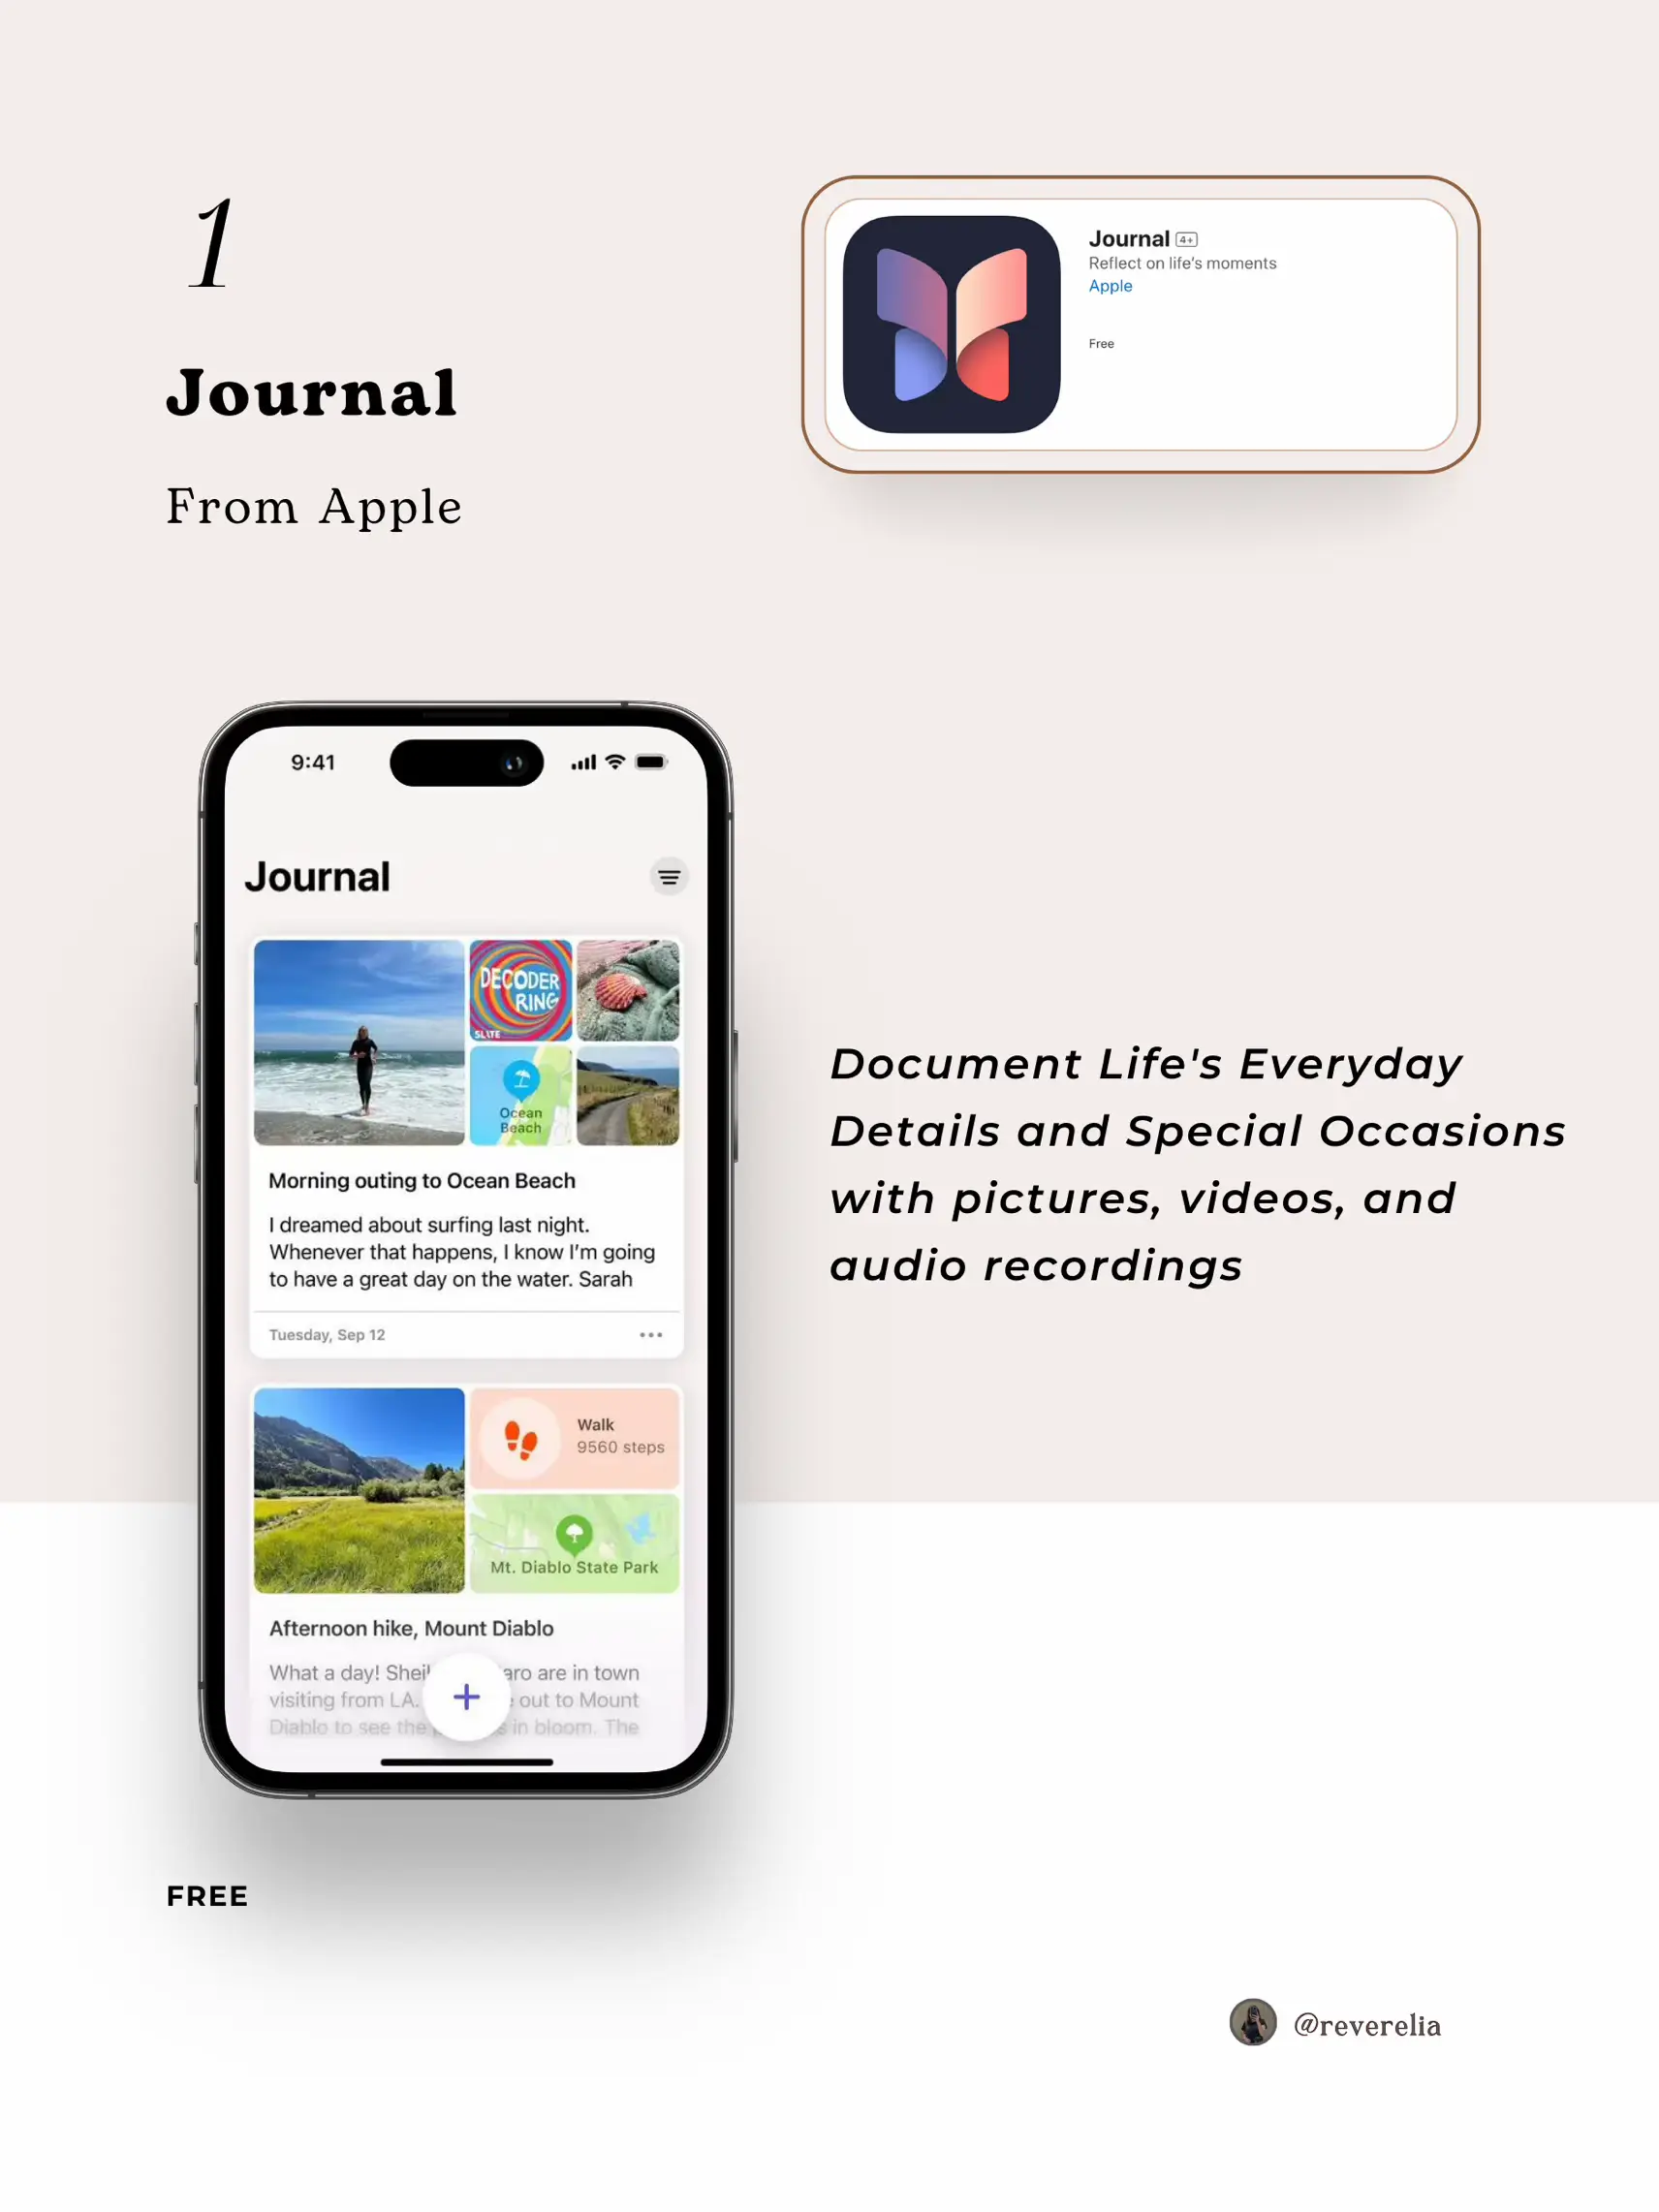  A phone screen displaying a journal from Apple with a picture of a cell phone.